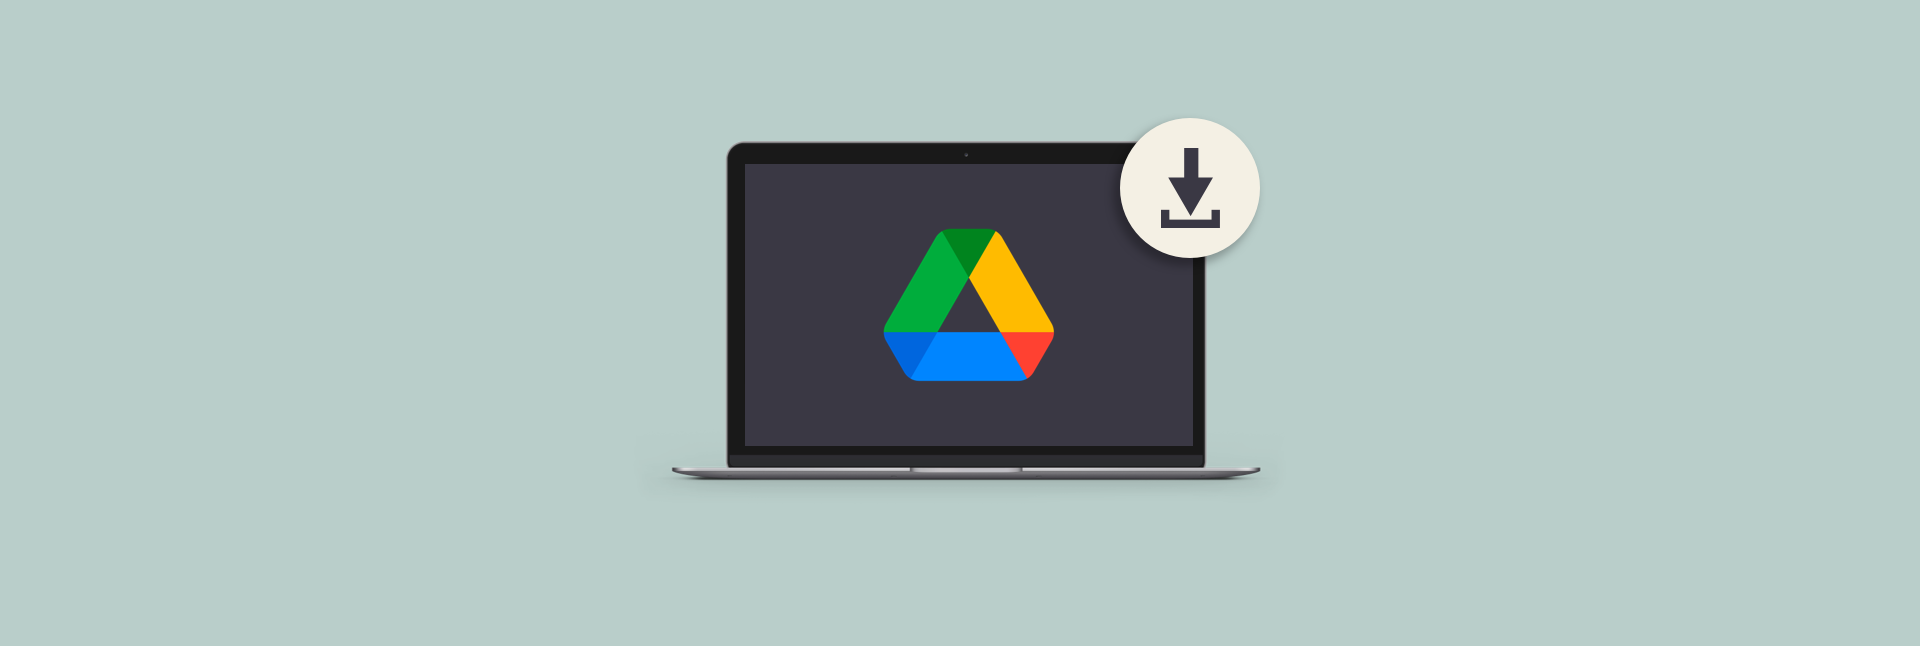 how to download all images from google drive